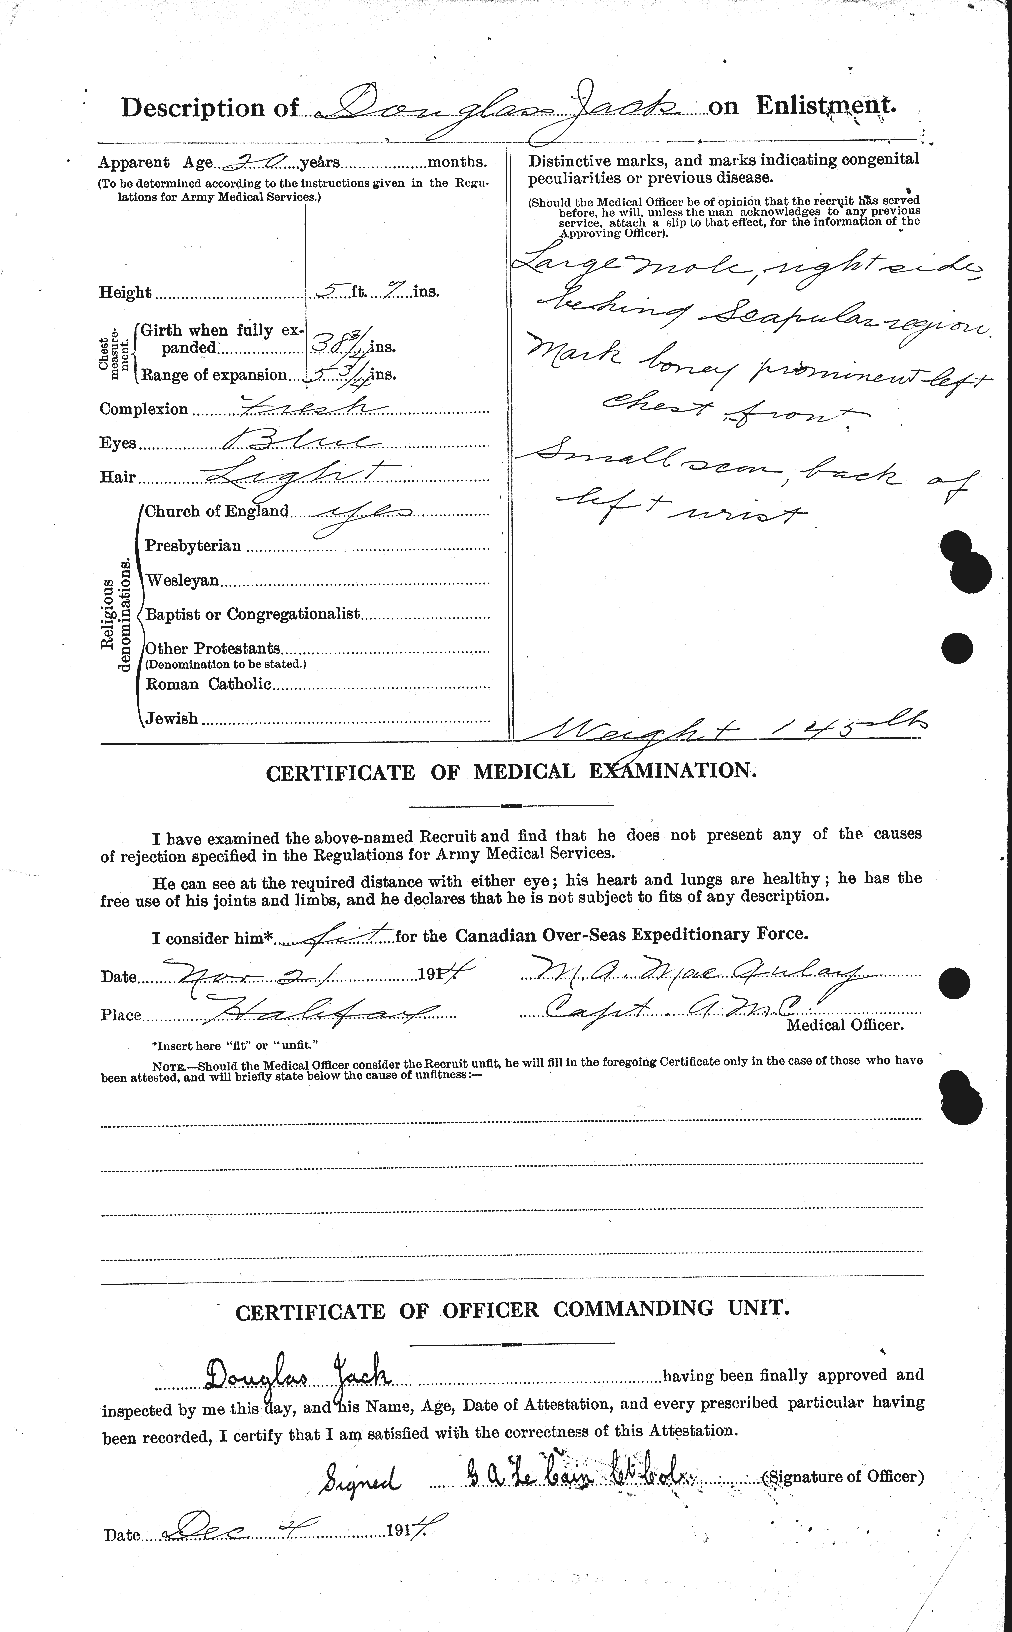 Personnel Records of the First World War - CEF 409693b